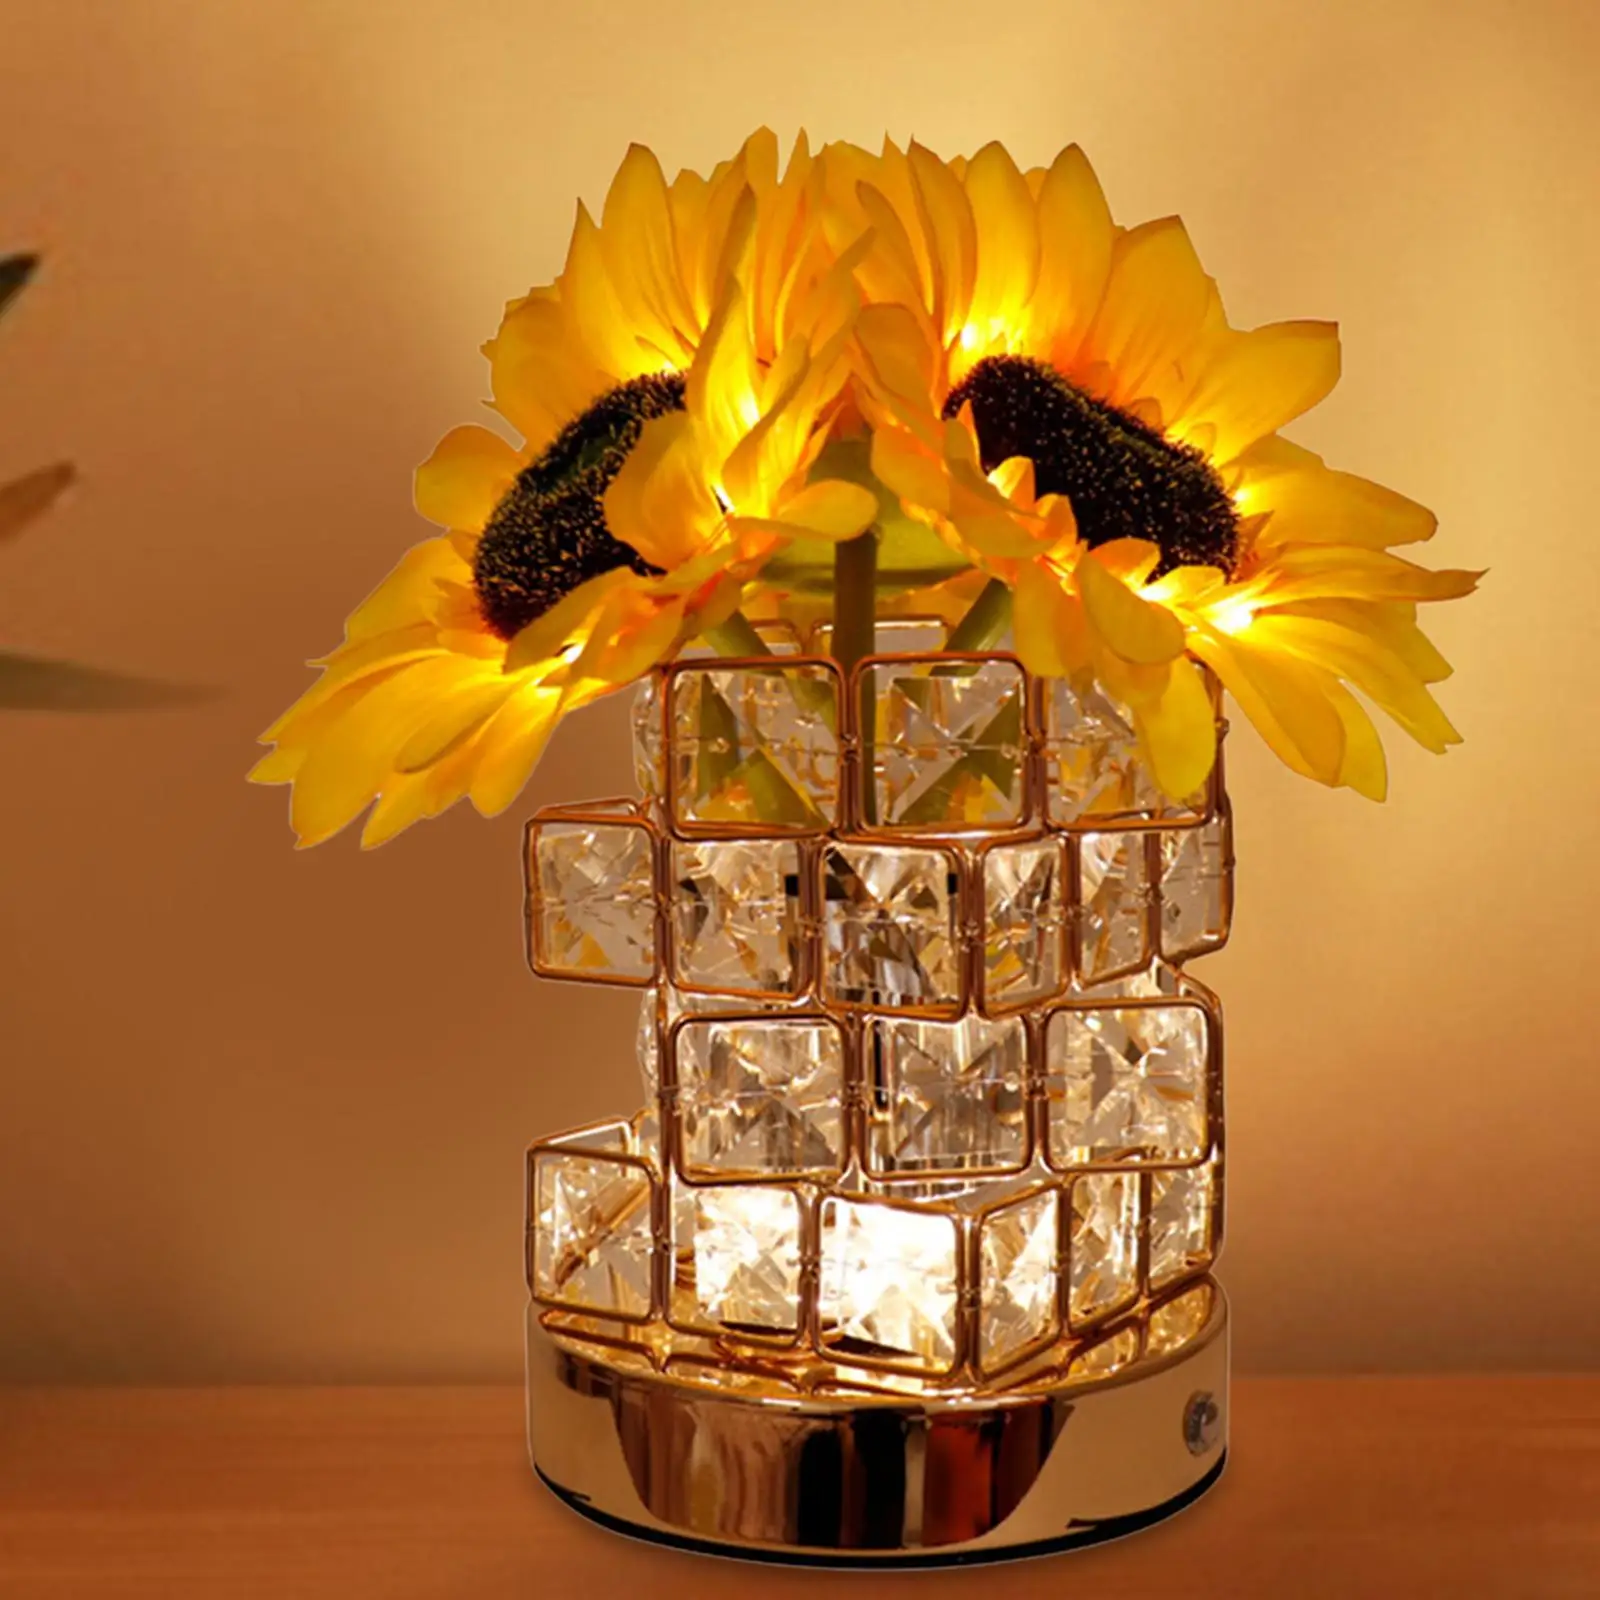 Artificial Flower Lamp Touch Control Sunflowers Bedside Table Lamp LED Nightlight for Living Room Cabinet NightStand Farmhouse